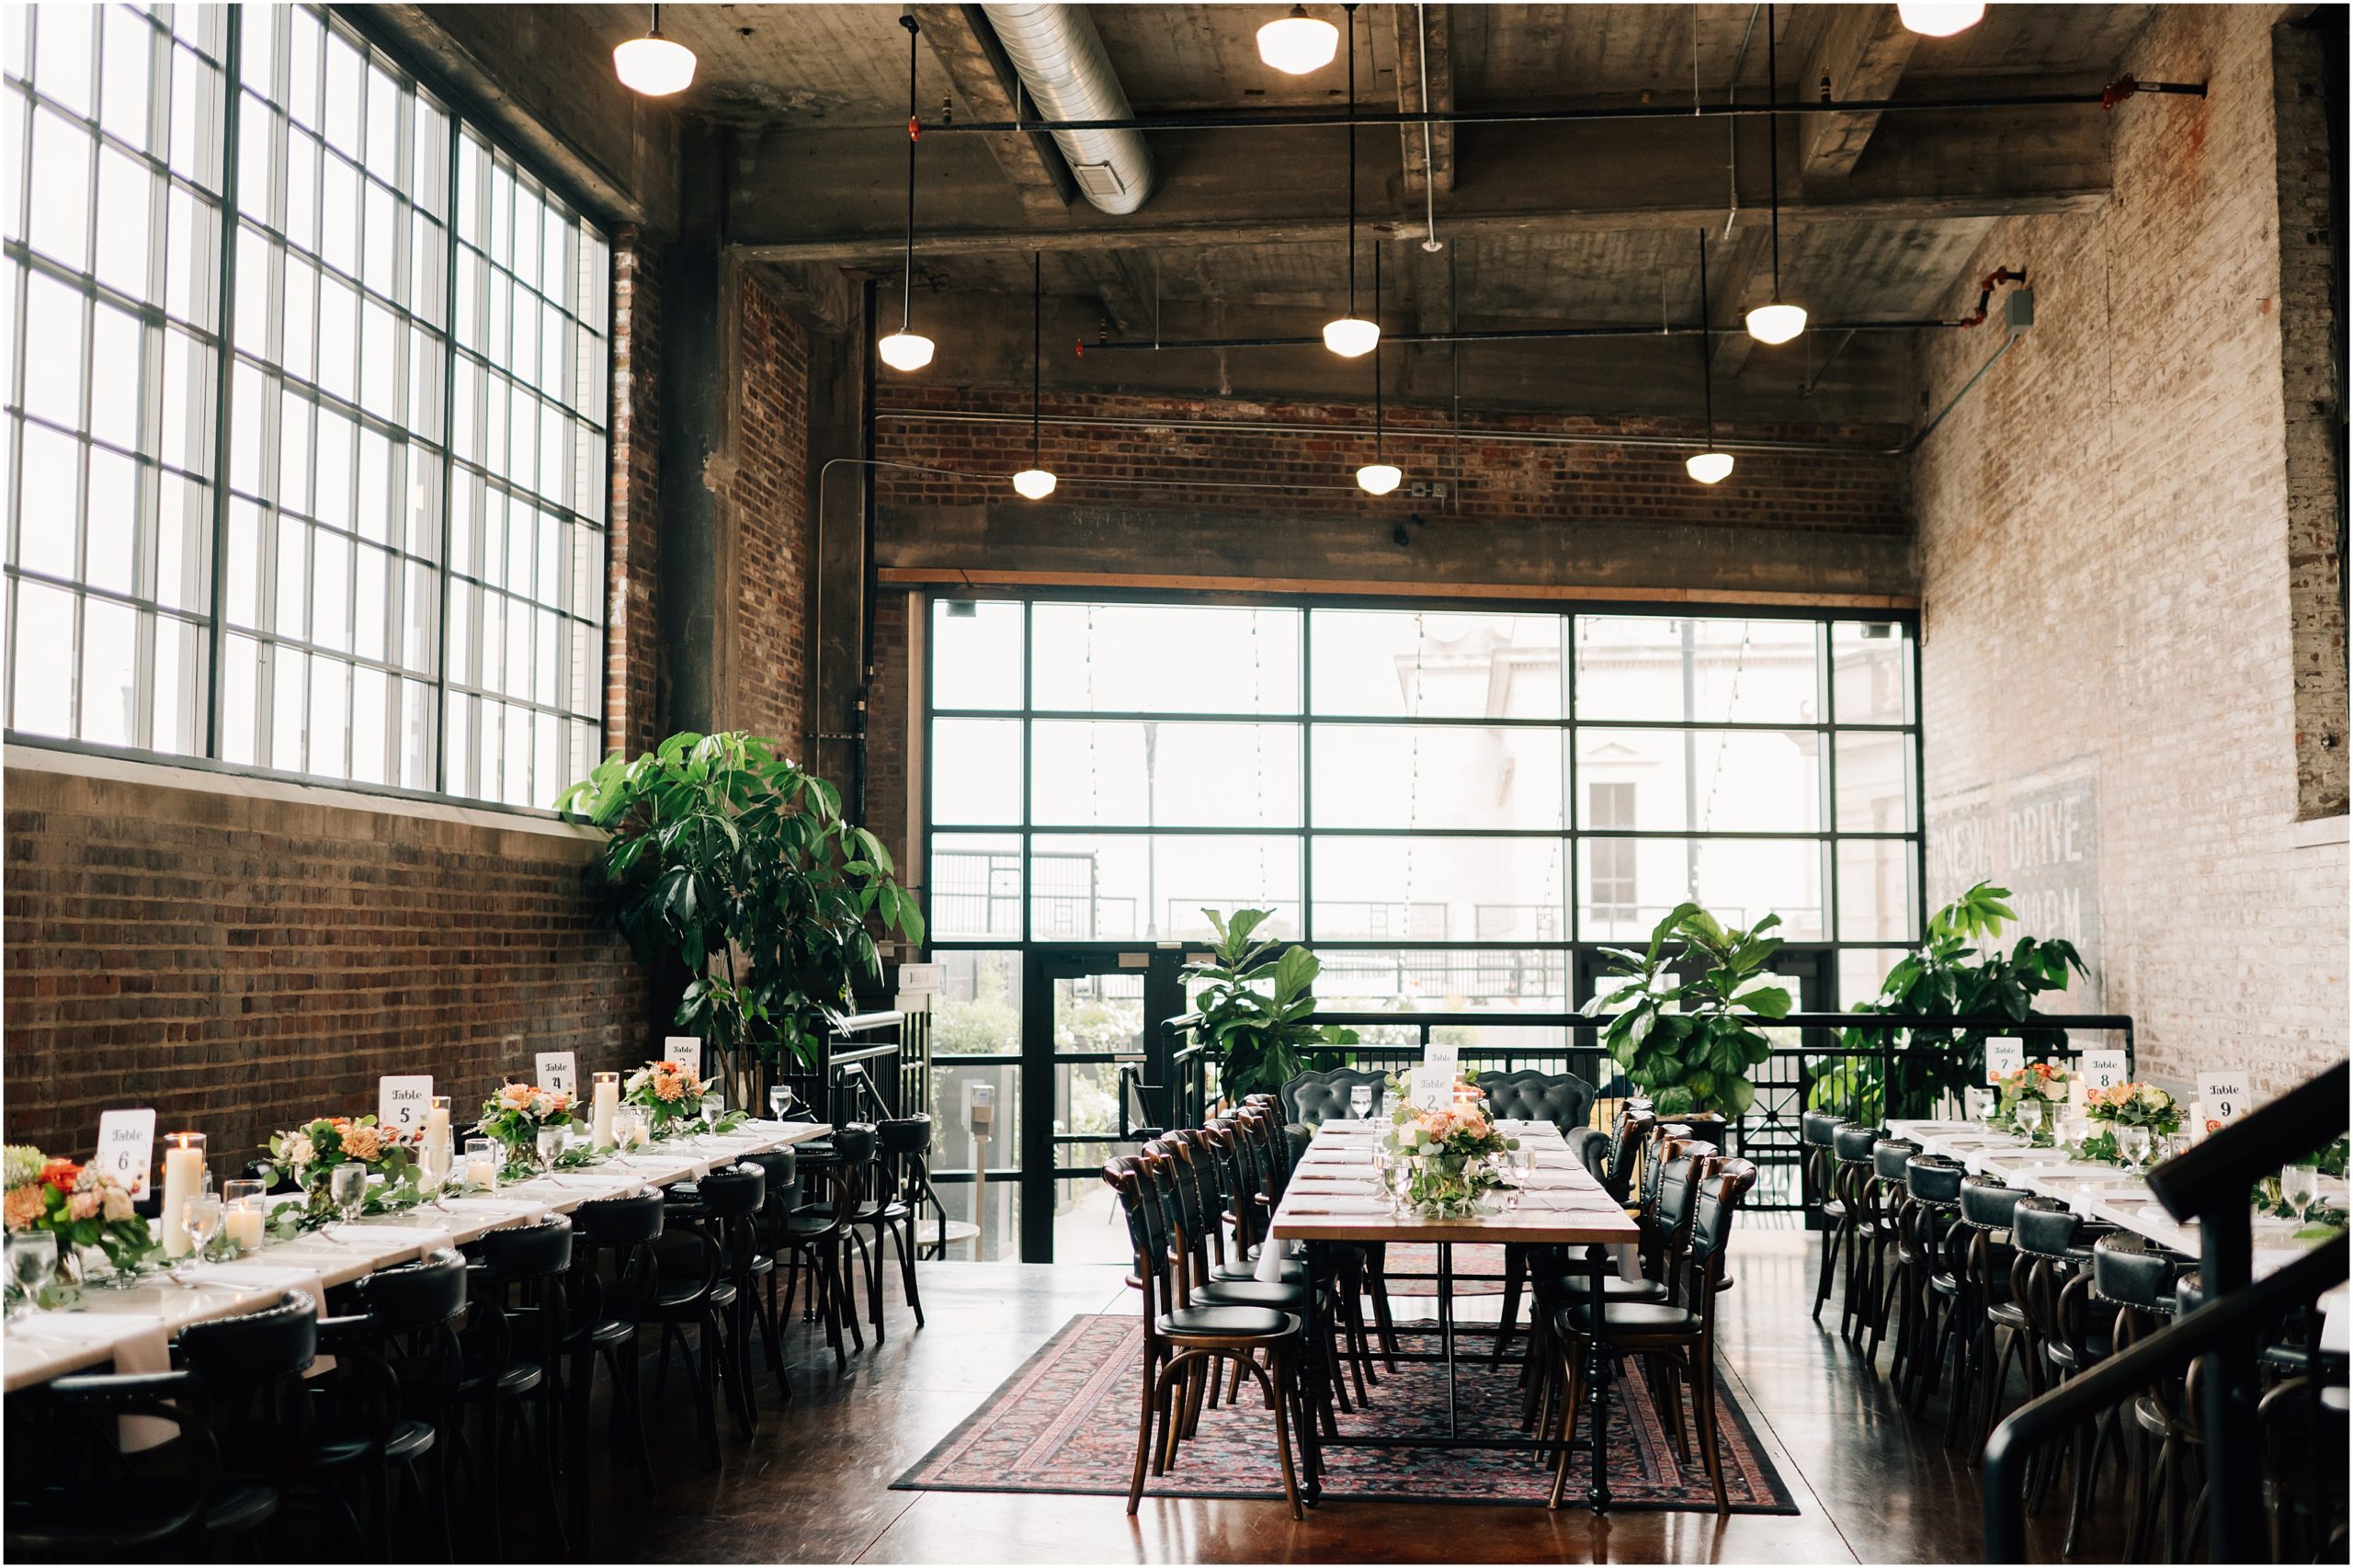 Cafe Postale serves as the perfect wedding venue in omaha NE for this simple and colorful wedding. Peach and burnt orange florals with brick walls. Photo by Anna Brace, who specializes in Omaha NE Wedding Photography. 